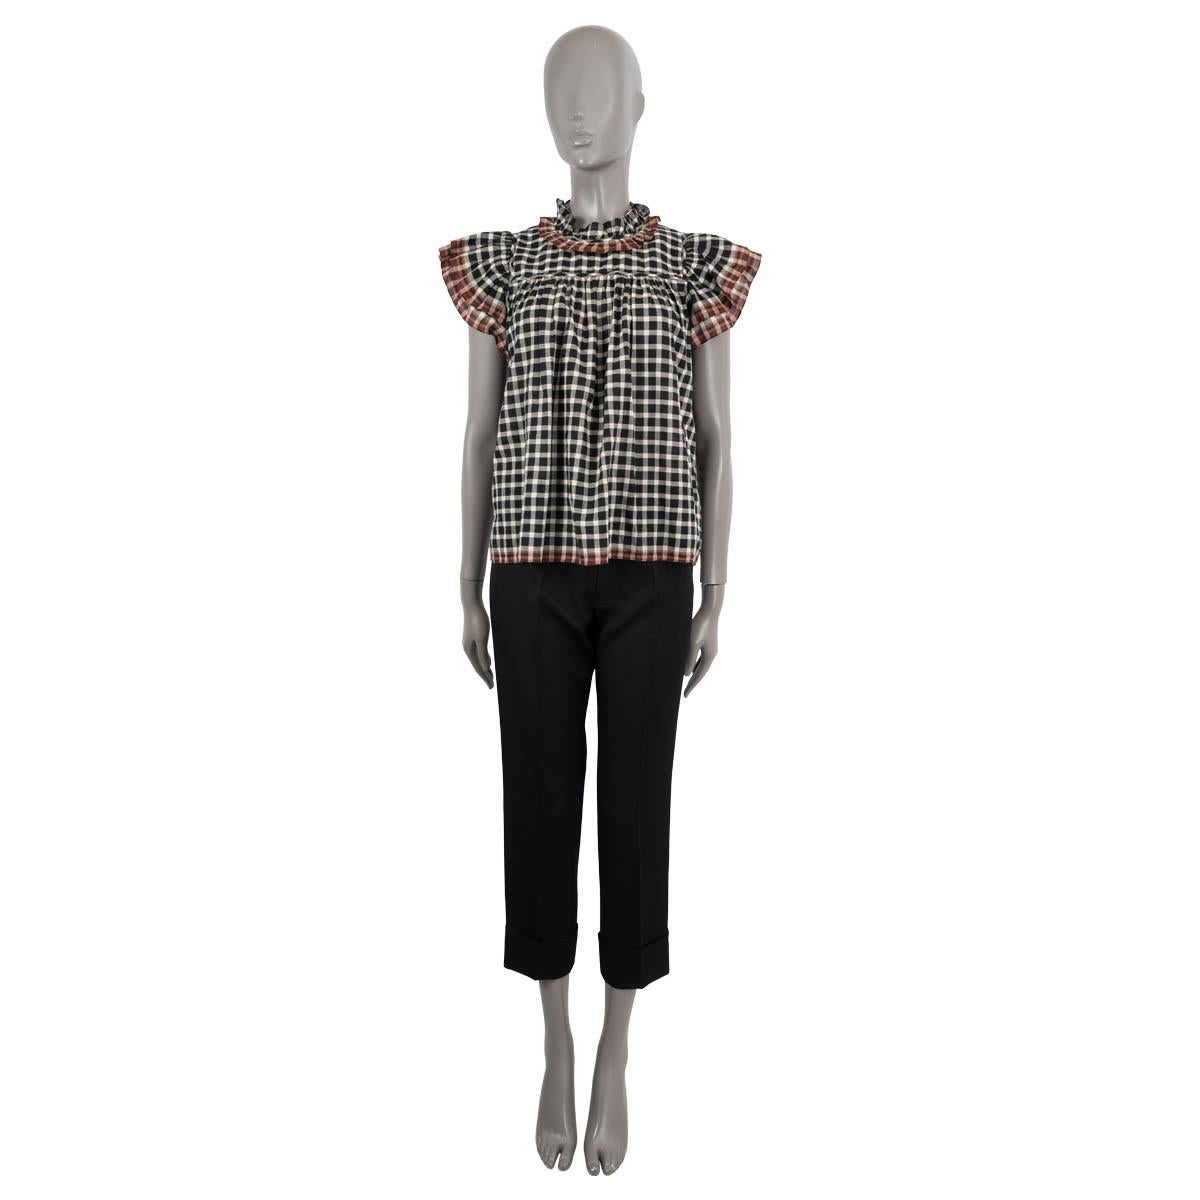 100% authentic Ulla Johnson Blair top in black and white gingham cotton (100% - please note the conent tag is missing). Features puffed shoulder, subtle gathering and ruffled trims and claret striping. Opens with a concealed hook zip in the back.